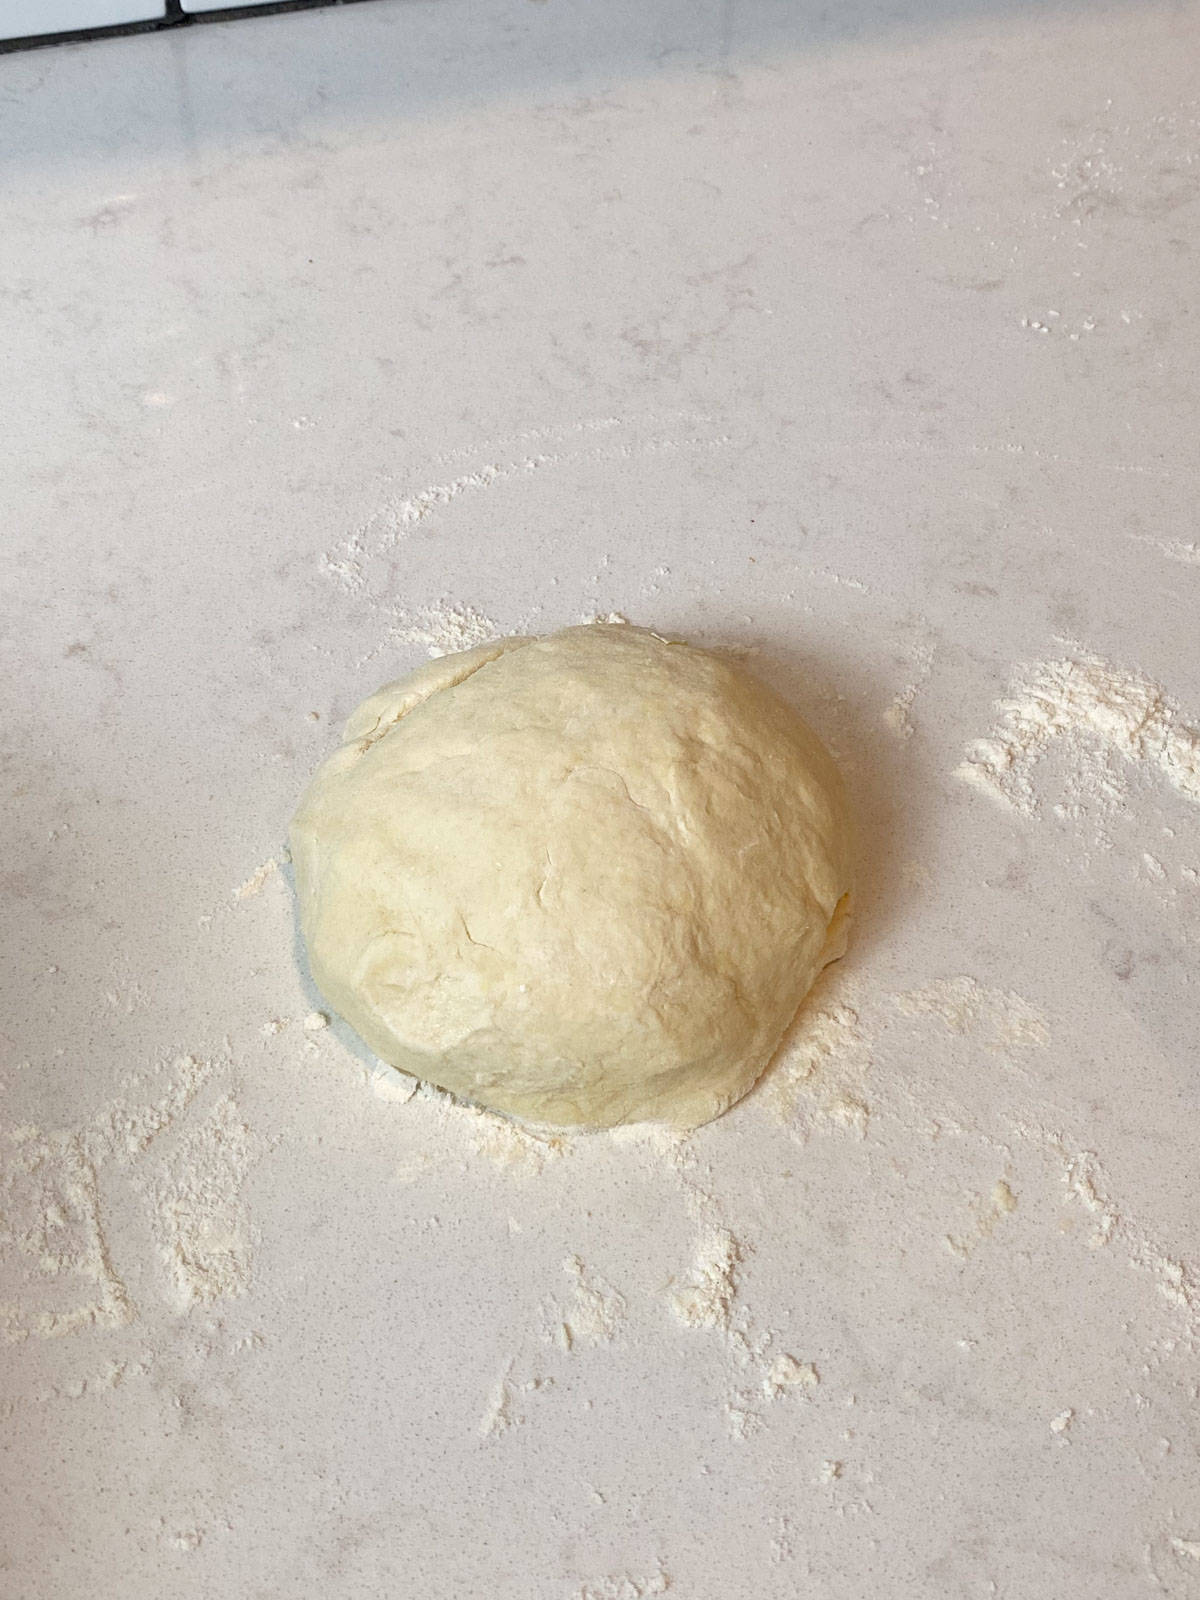 Form the galette dough into a smooth ball.